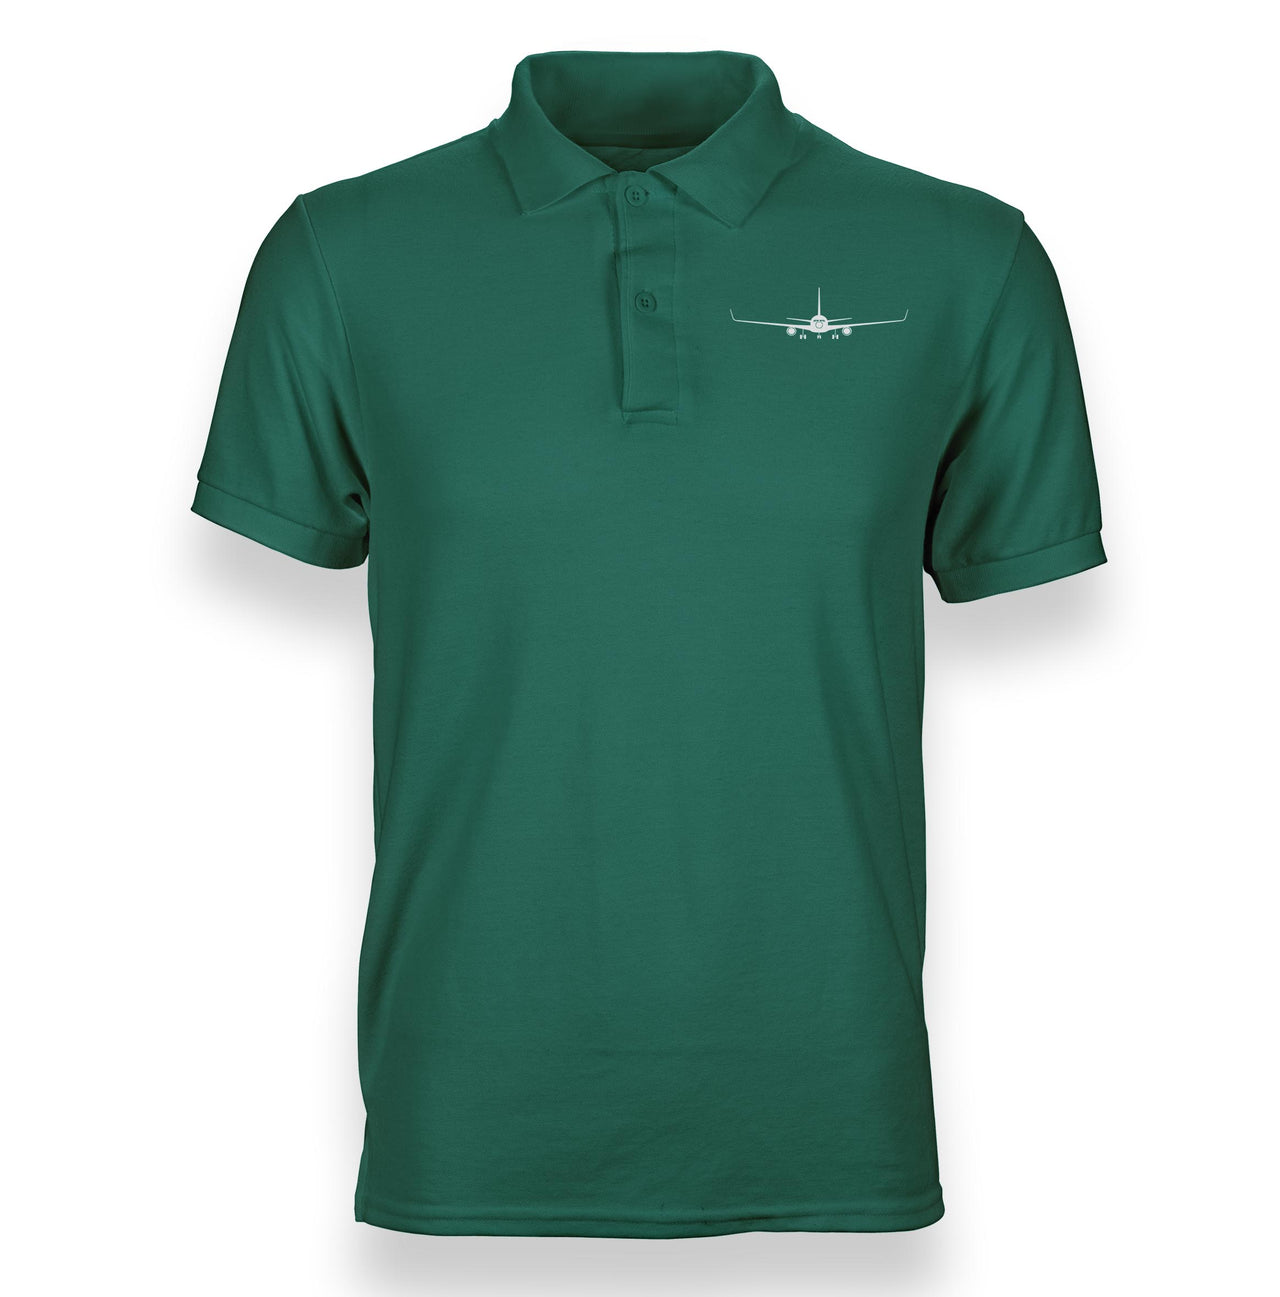 Boeing 767 Silhouette Designed Polo T-Shirts